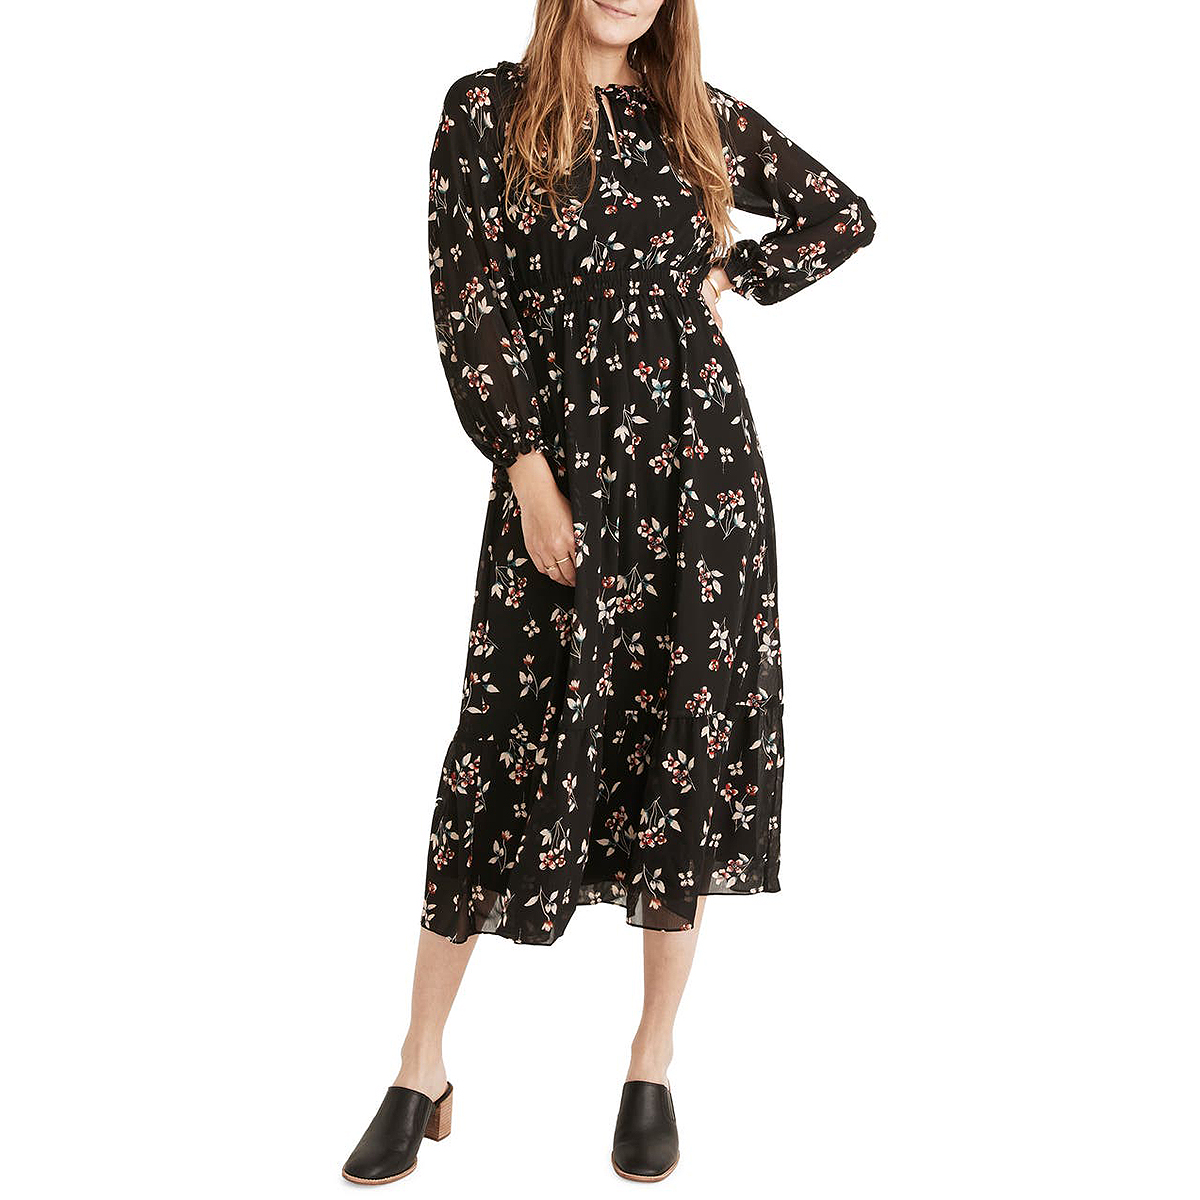 Summer Fashion Deals in the Nordstrom Anniversary Sale